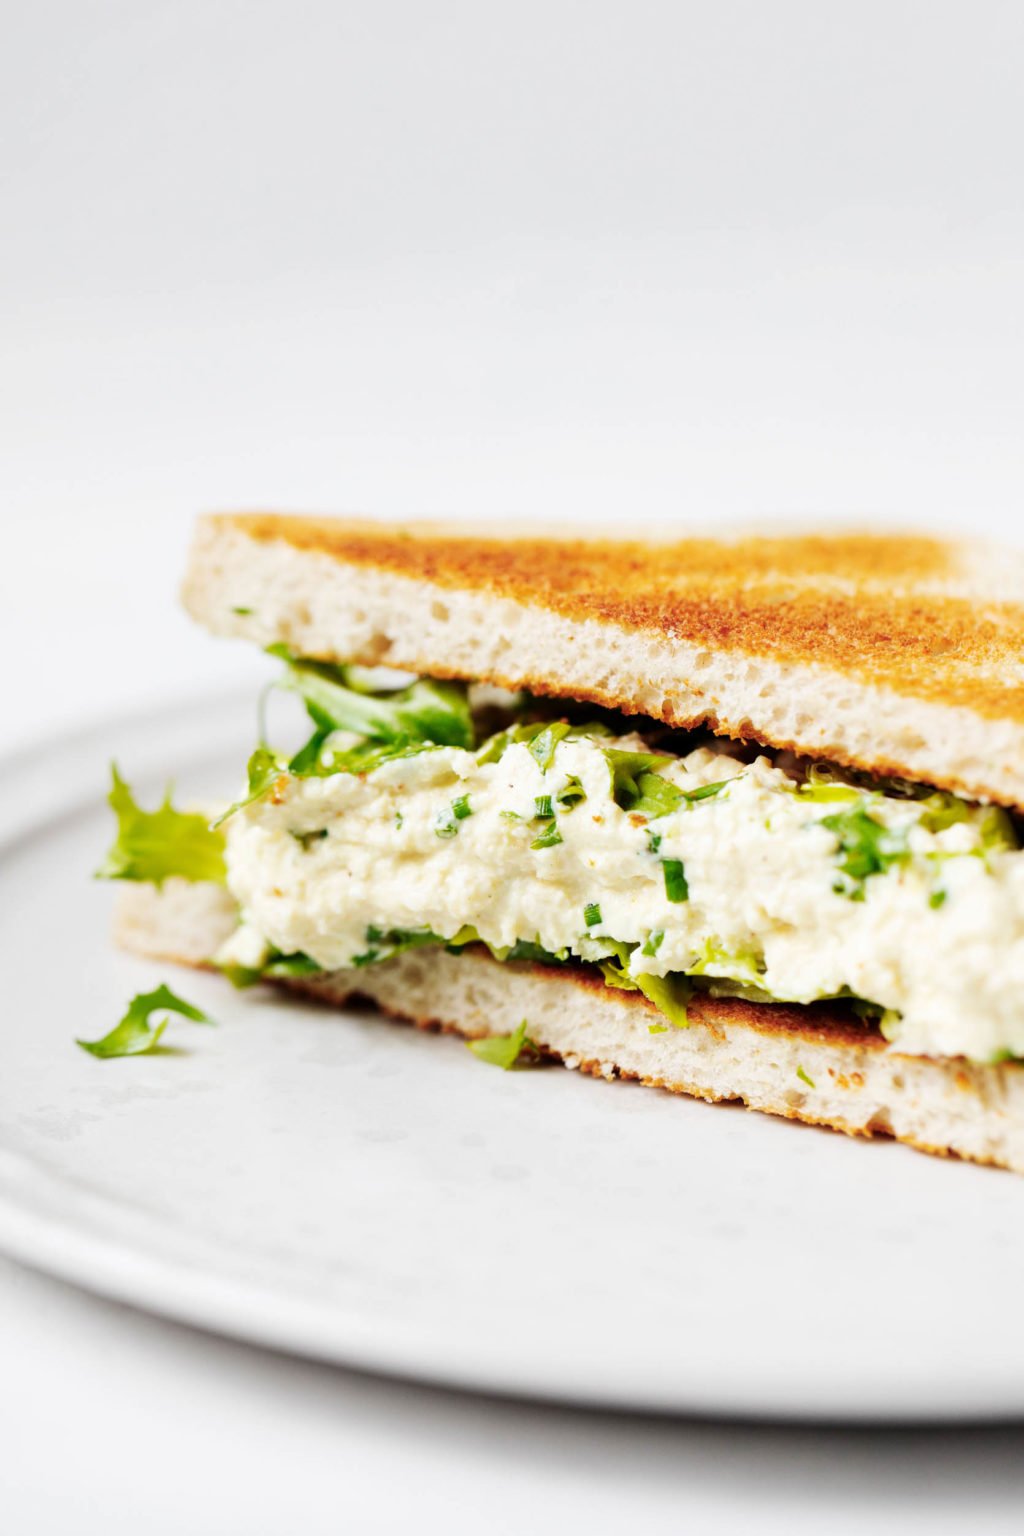 A toasted sandwich has been prepared with a vegan tofu egg salad. It's plated on a white ceramic plate.